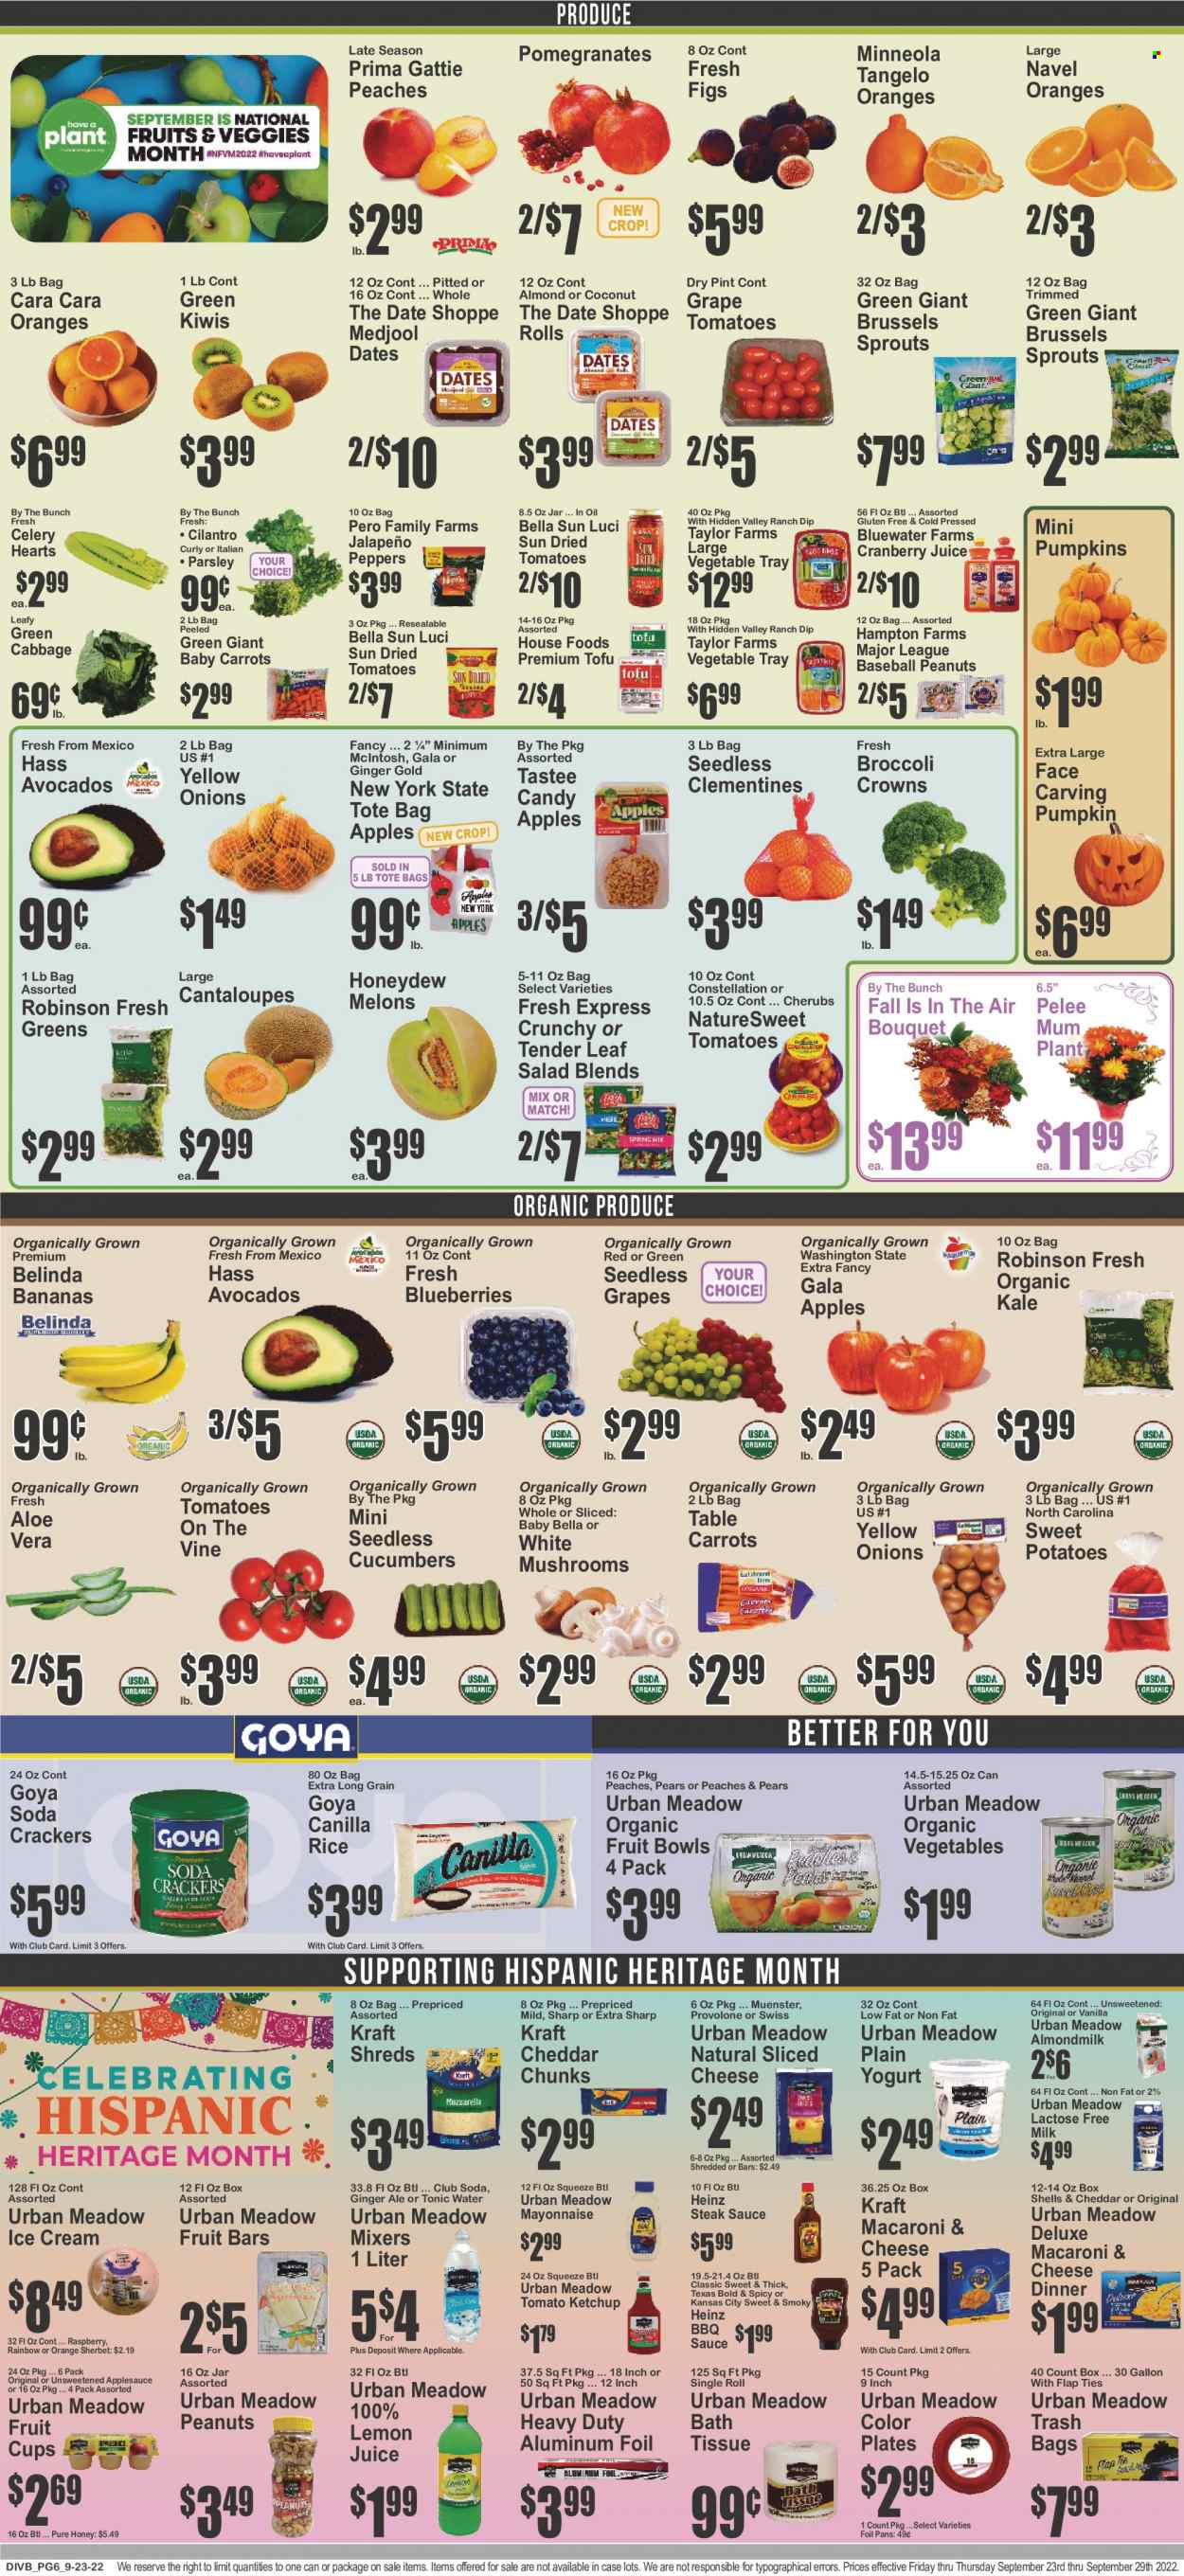 thumbnail - Food Dynasty Flyer - 09/23/2022 - 09/29/2022 - Sales products - mushrooms, cabbage, cantaloupe, carrots, celery, cucumber, sweet potato, kale, potatoes, pumpkin, parsley, onion, salad, jalapeño, brussel sprouts, sleeved celery, avocado, figs, Gala, kiwi, seedless grapes, honeydew, pears, oranges, fruit cup, macaroni & cheese, sauce, Kraft®, sliced cheese, Münster cheese, tofu, Provolone, almond milk, milk, lactose free milk, mayonnaise, dip, ice cream, sherbet, crackers, dried tomatoes, Heinz, Goya, Bella Sun Luci, rice, cilantro, BBQ sauce, steak sauce, ketchup, apple sauce, honey, peanuts, cranberry juice, ginger ale, tonic, Club Soda, lemon juice, steak, bath tissue, Mum, trash bags, tray, plate, aluminium foil, tote, tote bag, bouquet, clementines, melons, pomegranate, peaches, navel oranges. Page 6.